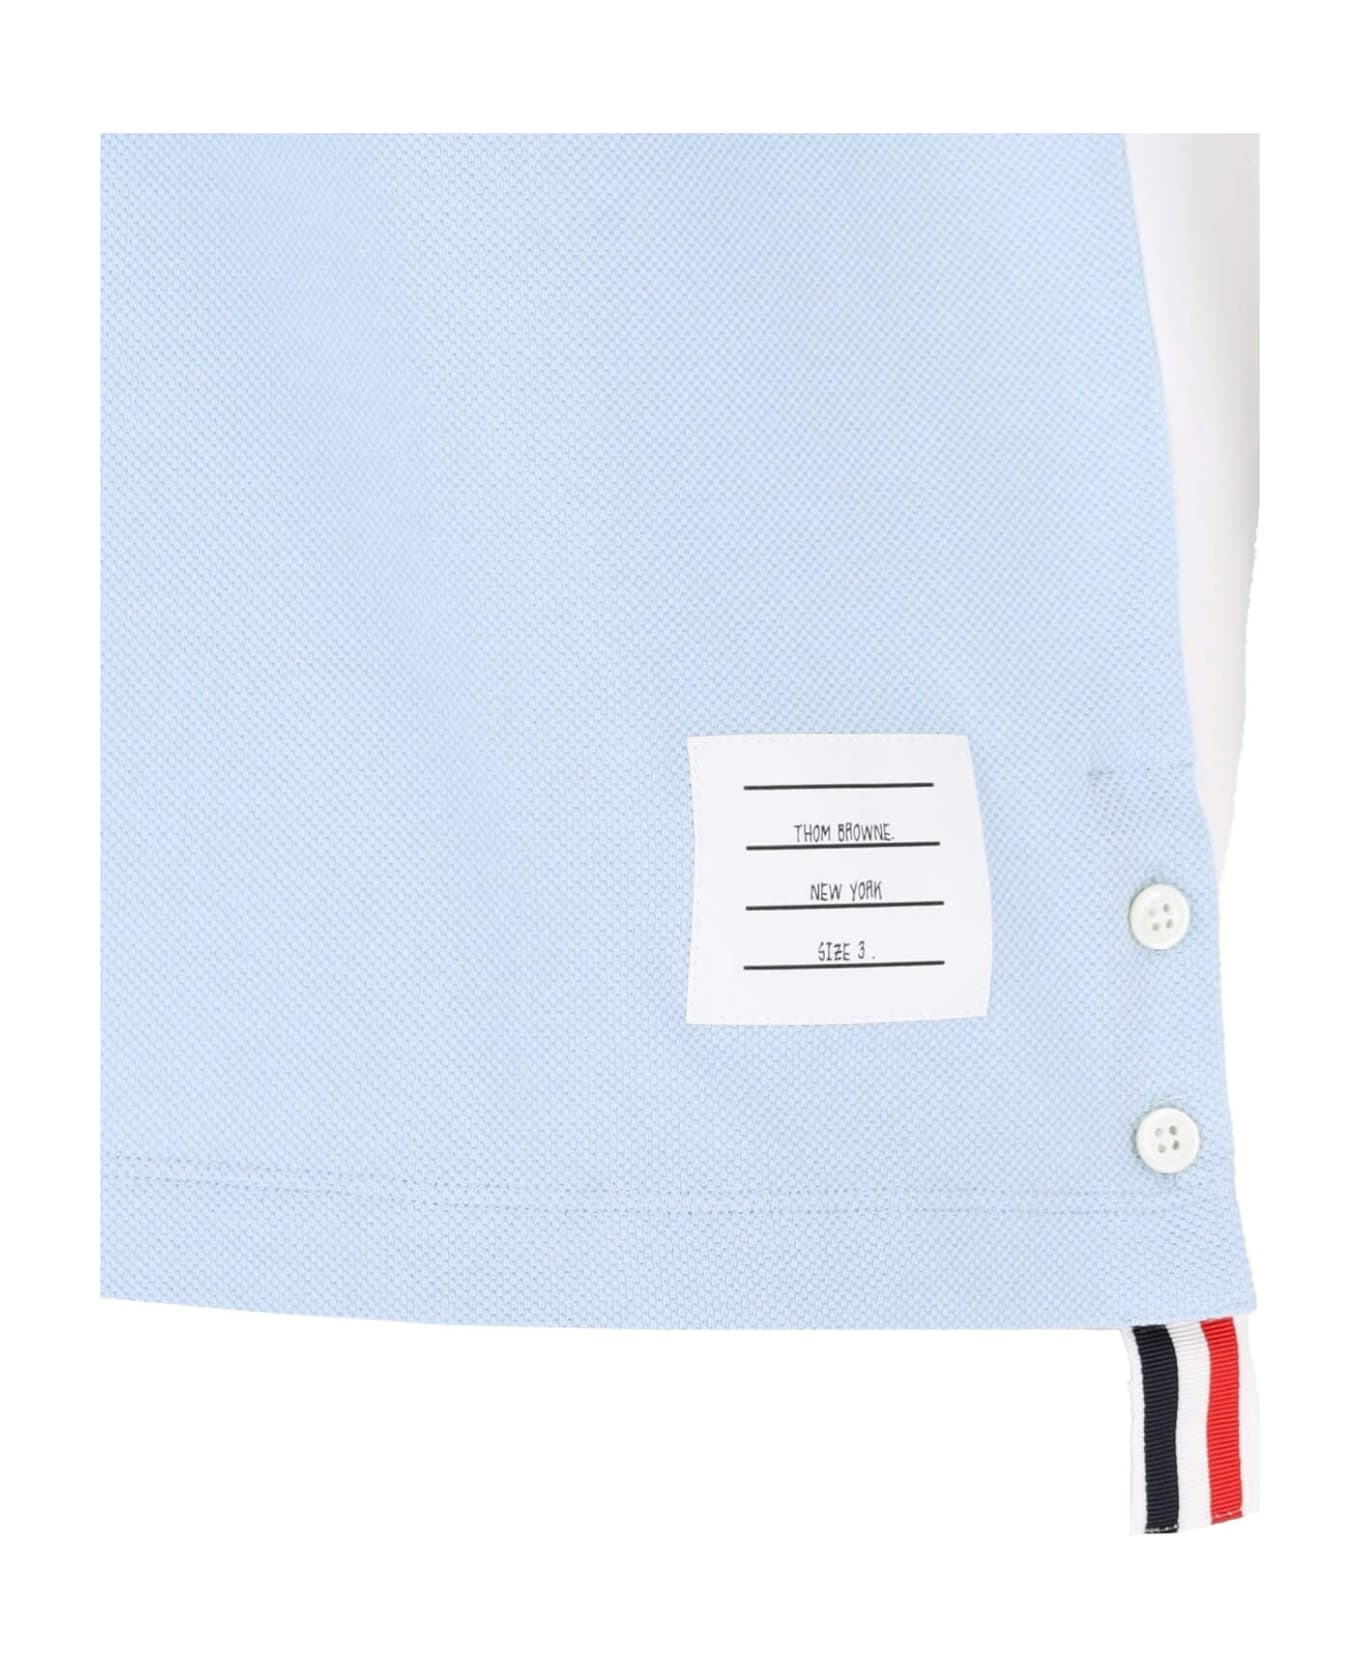 Thom Browne Color Block Polo Shirt - Light blue ポロシャツ